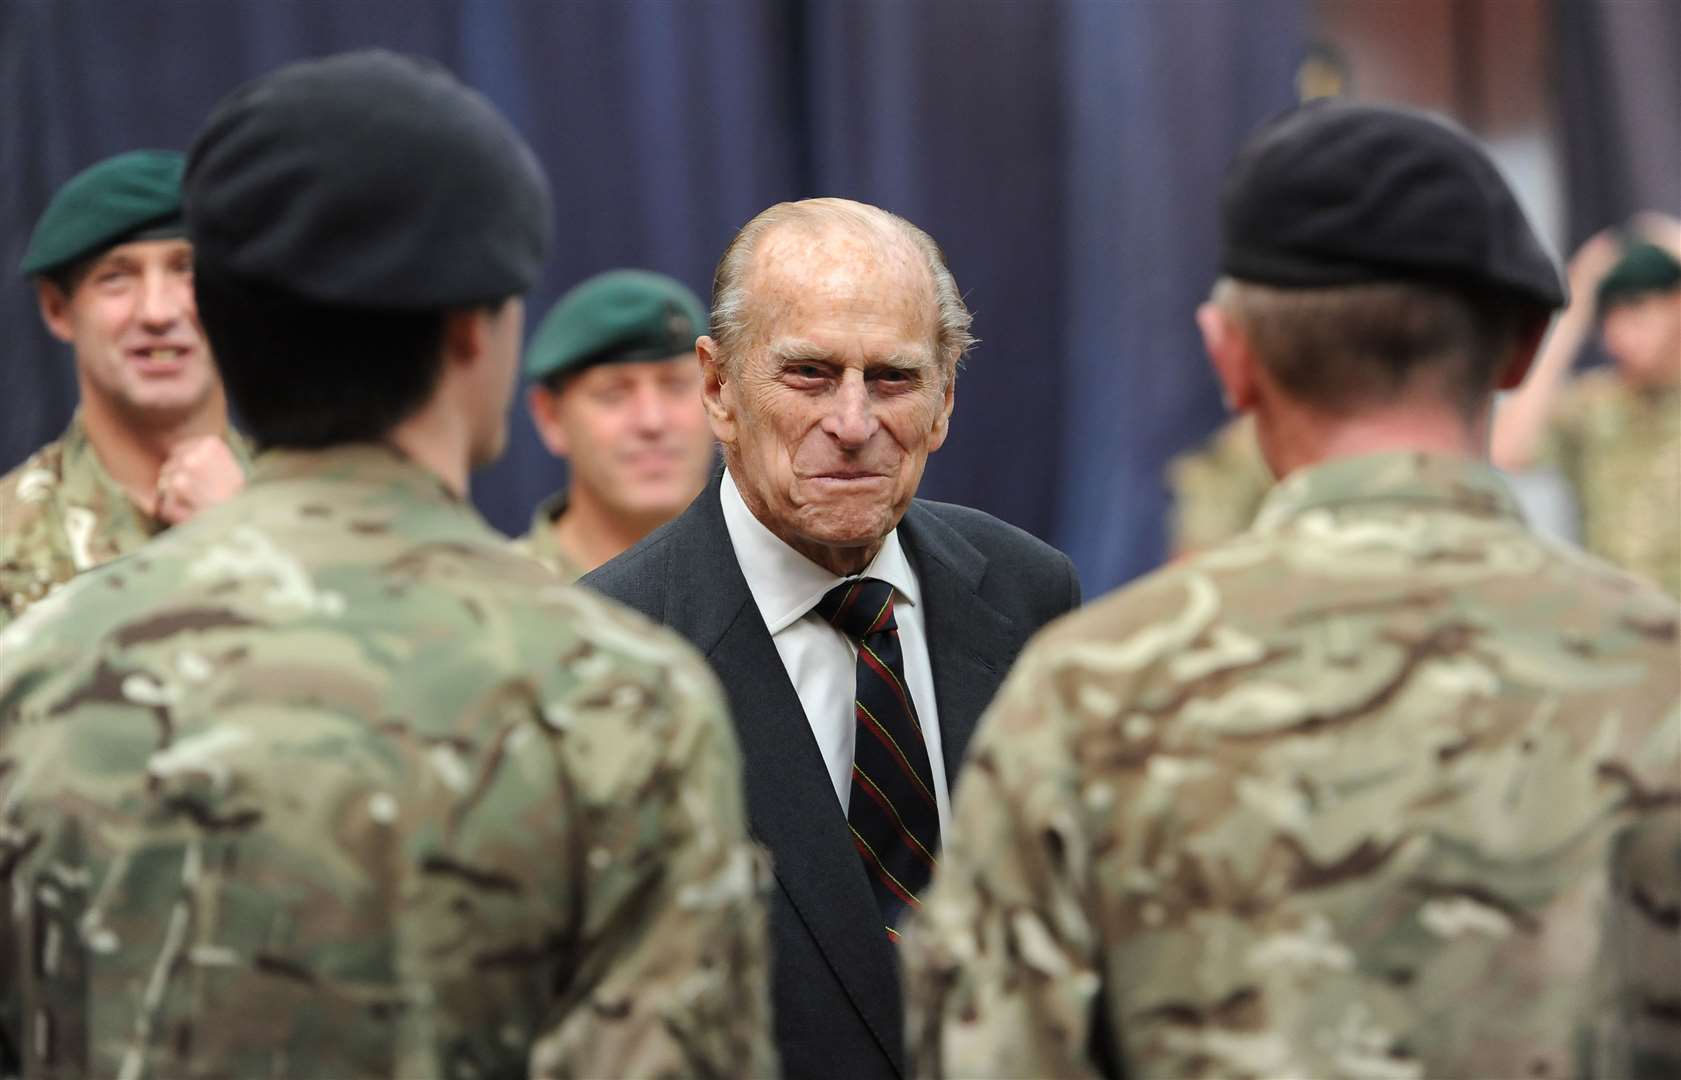 The Duke of Edinburgh, as Captain General of the Royal Marines, during a visit to 1 Assault Group Royal Marines (Andrew Matthews/PA)